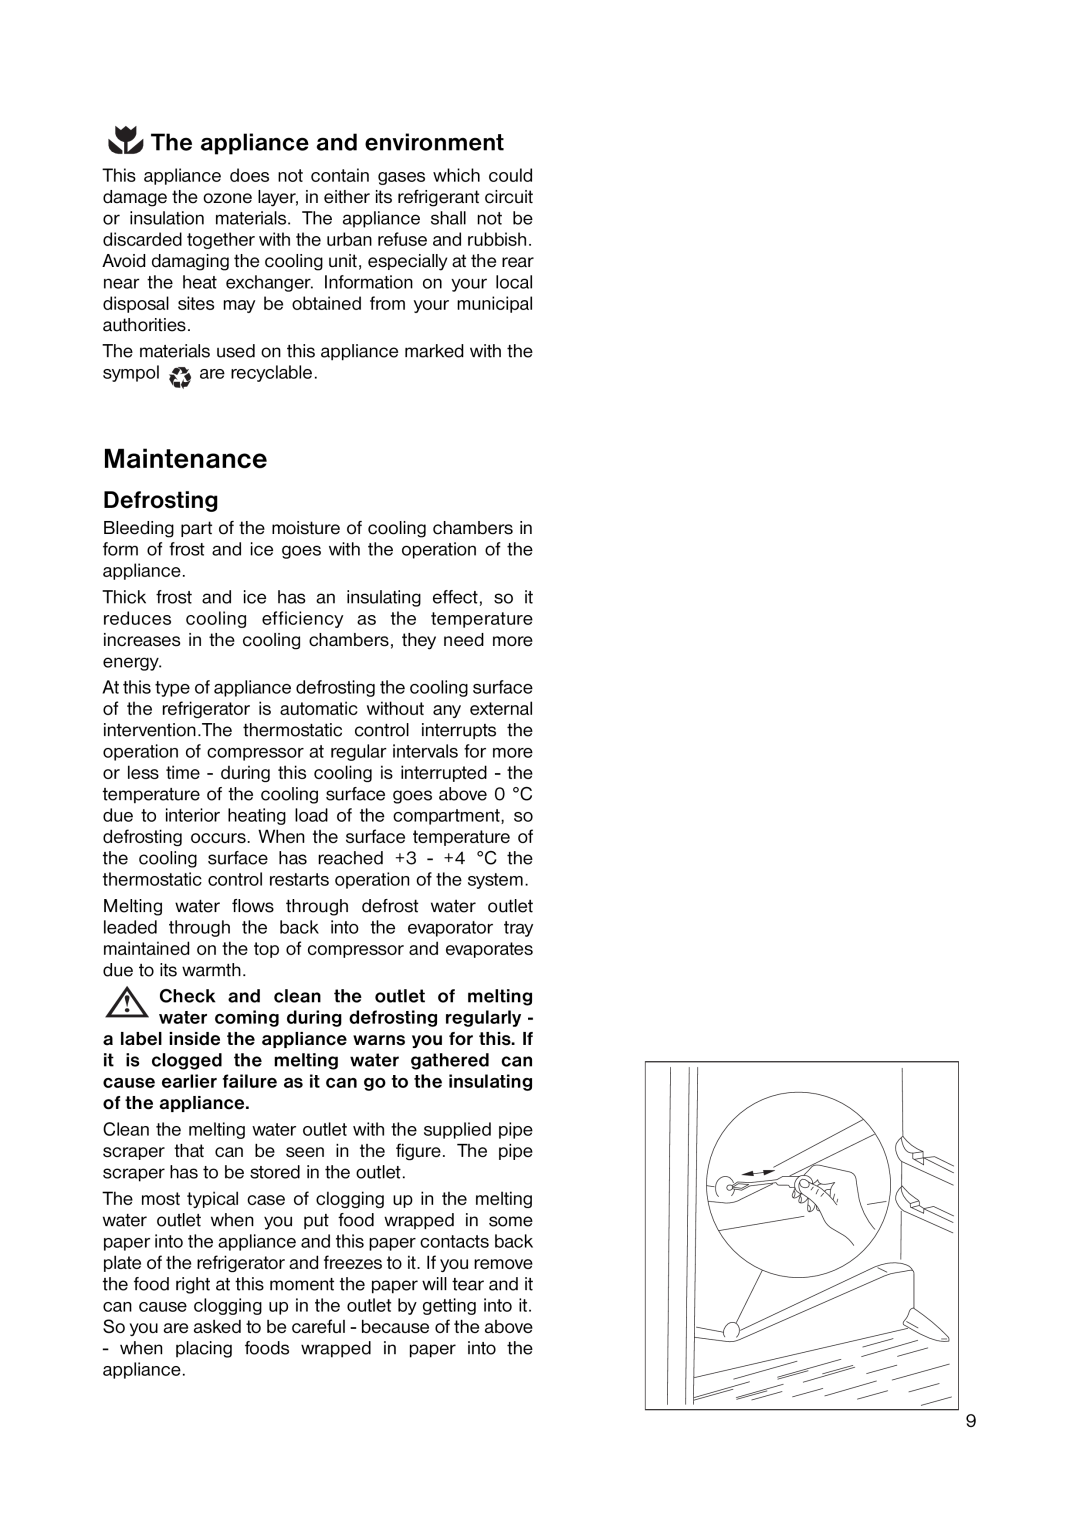 Zanussi ZERB 9043 manual Maintenance, The appliance and environment, Defrosting 